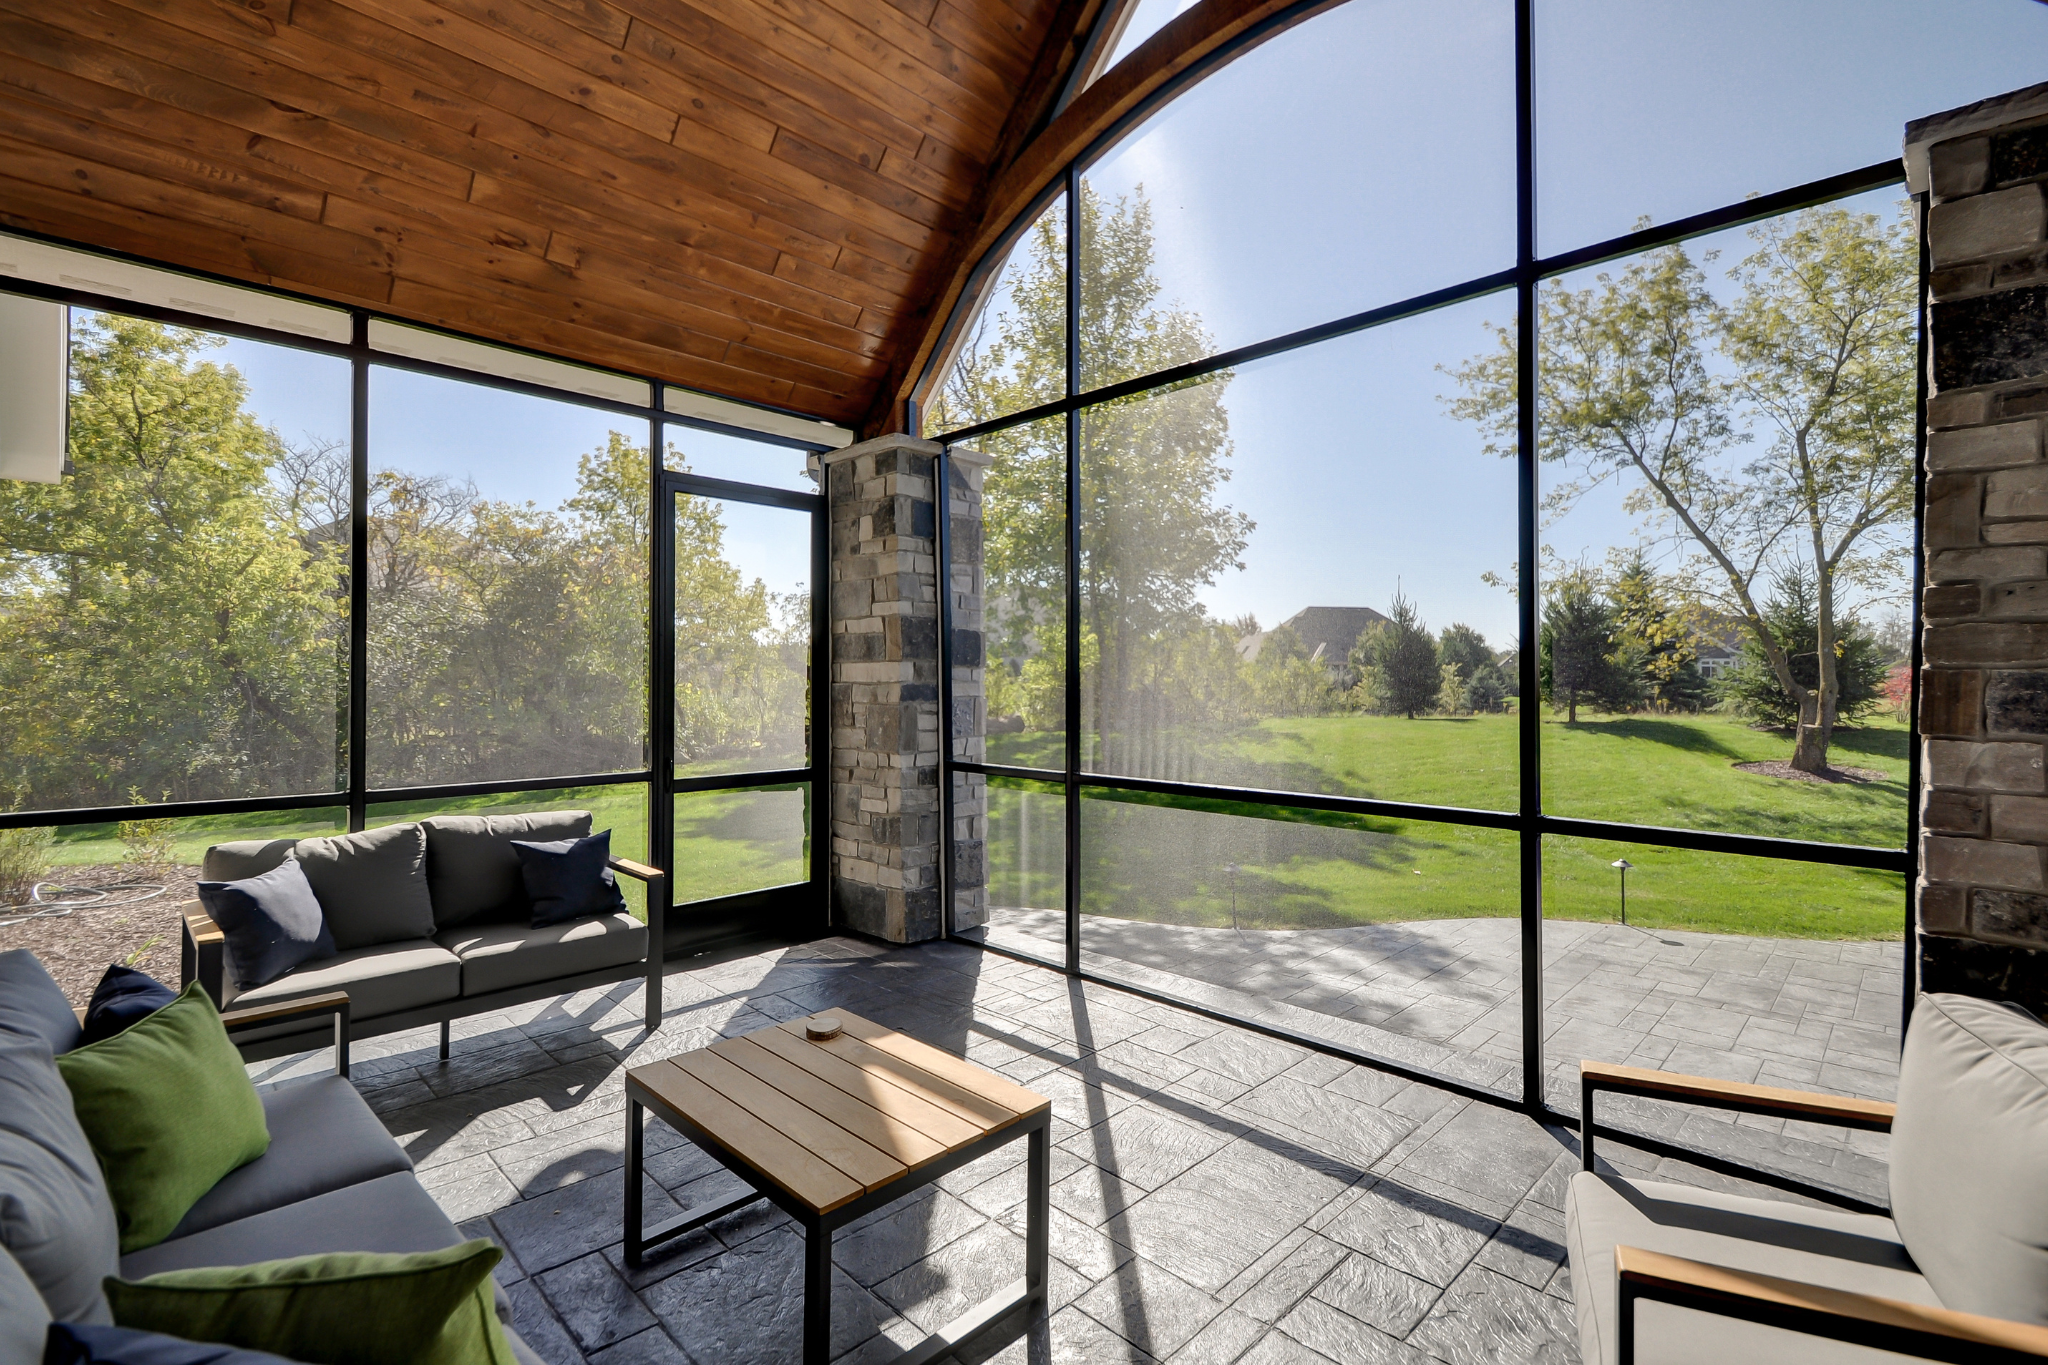 Screened-in porch with a beautiful view, created by Residential in Architects Wisconsin.